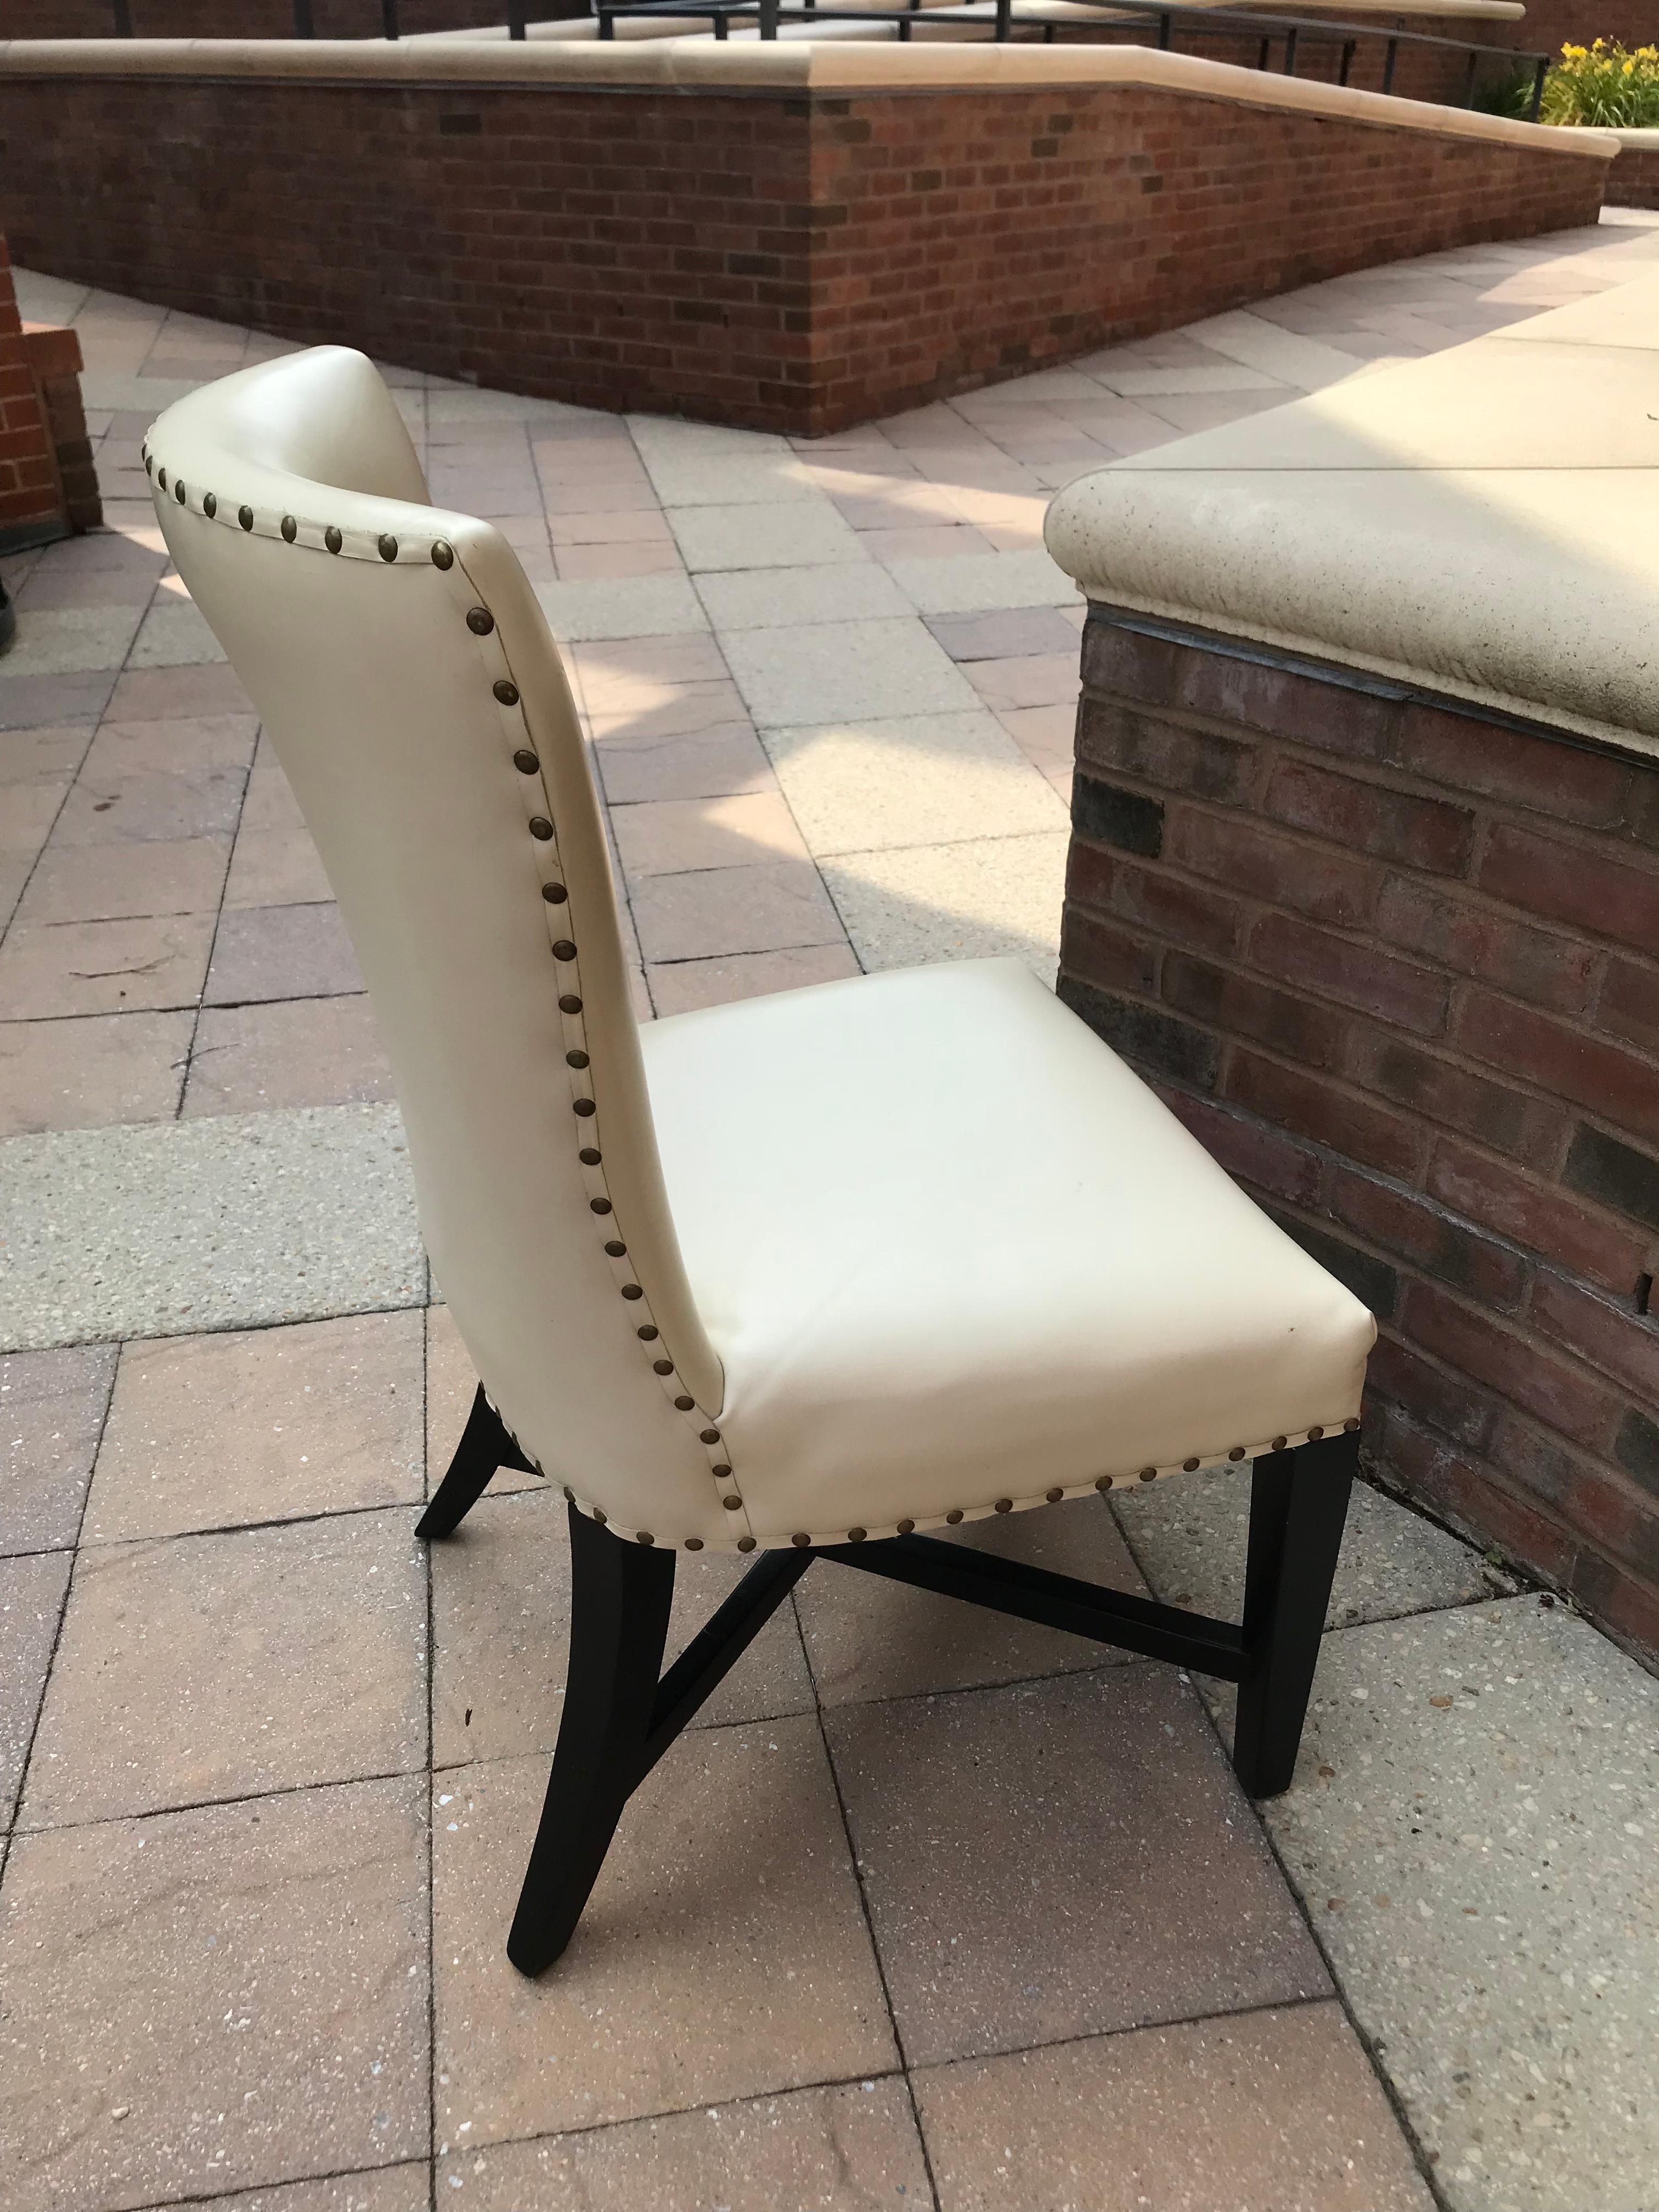 Set of ten elegant and comfortable ivory leather dining chairs finished with antique gold nailhead trim.
Chairs have some leather light surface scuff marks.  Normal wear. 
Seats and backs are padded. 

Seat depth 17.5”
Top of backrest width- 22” 

